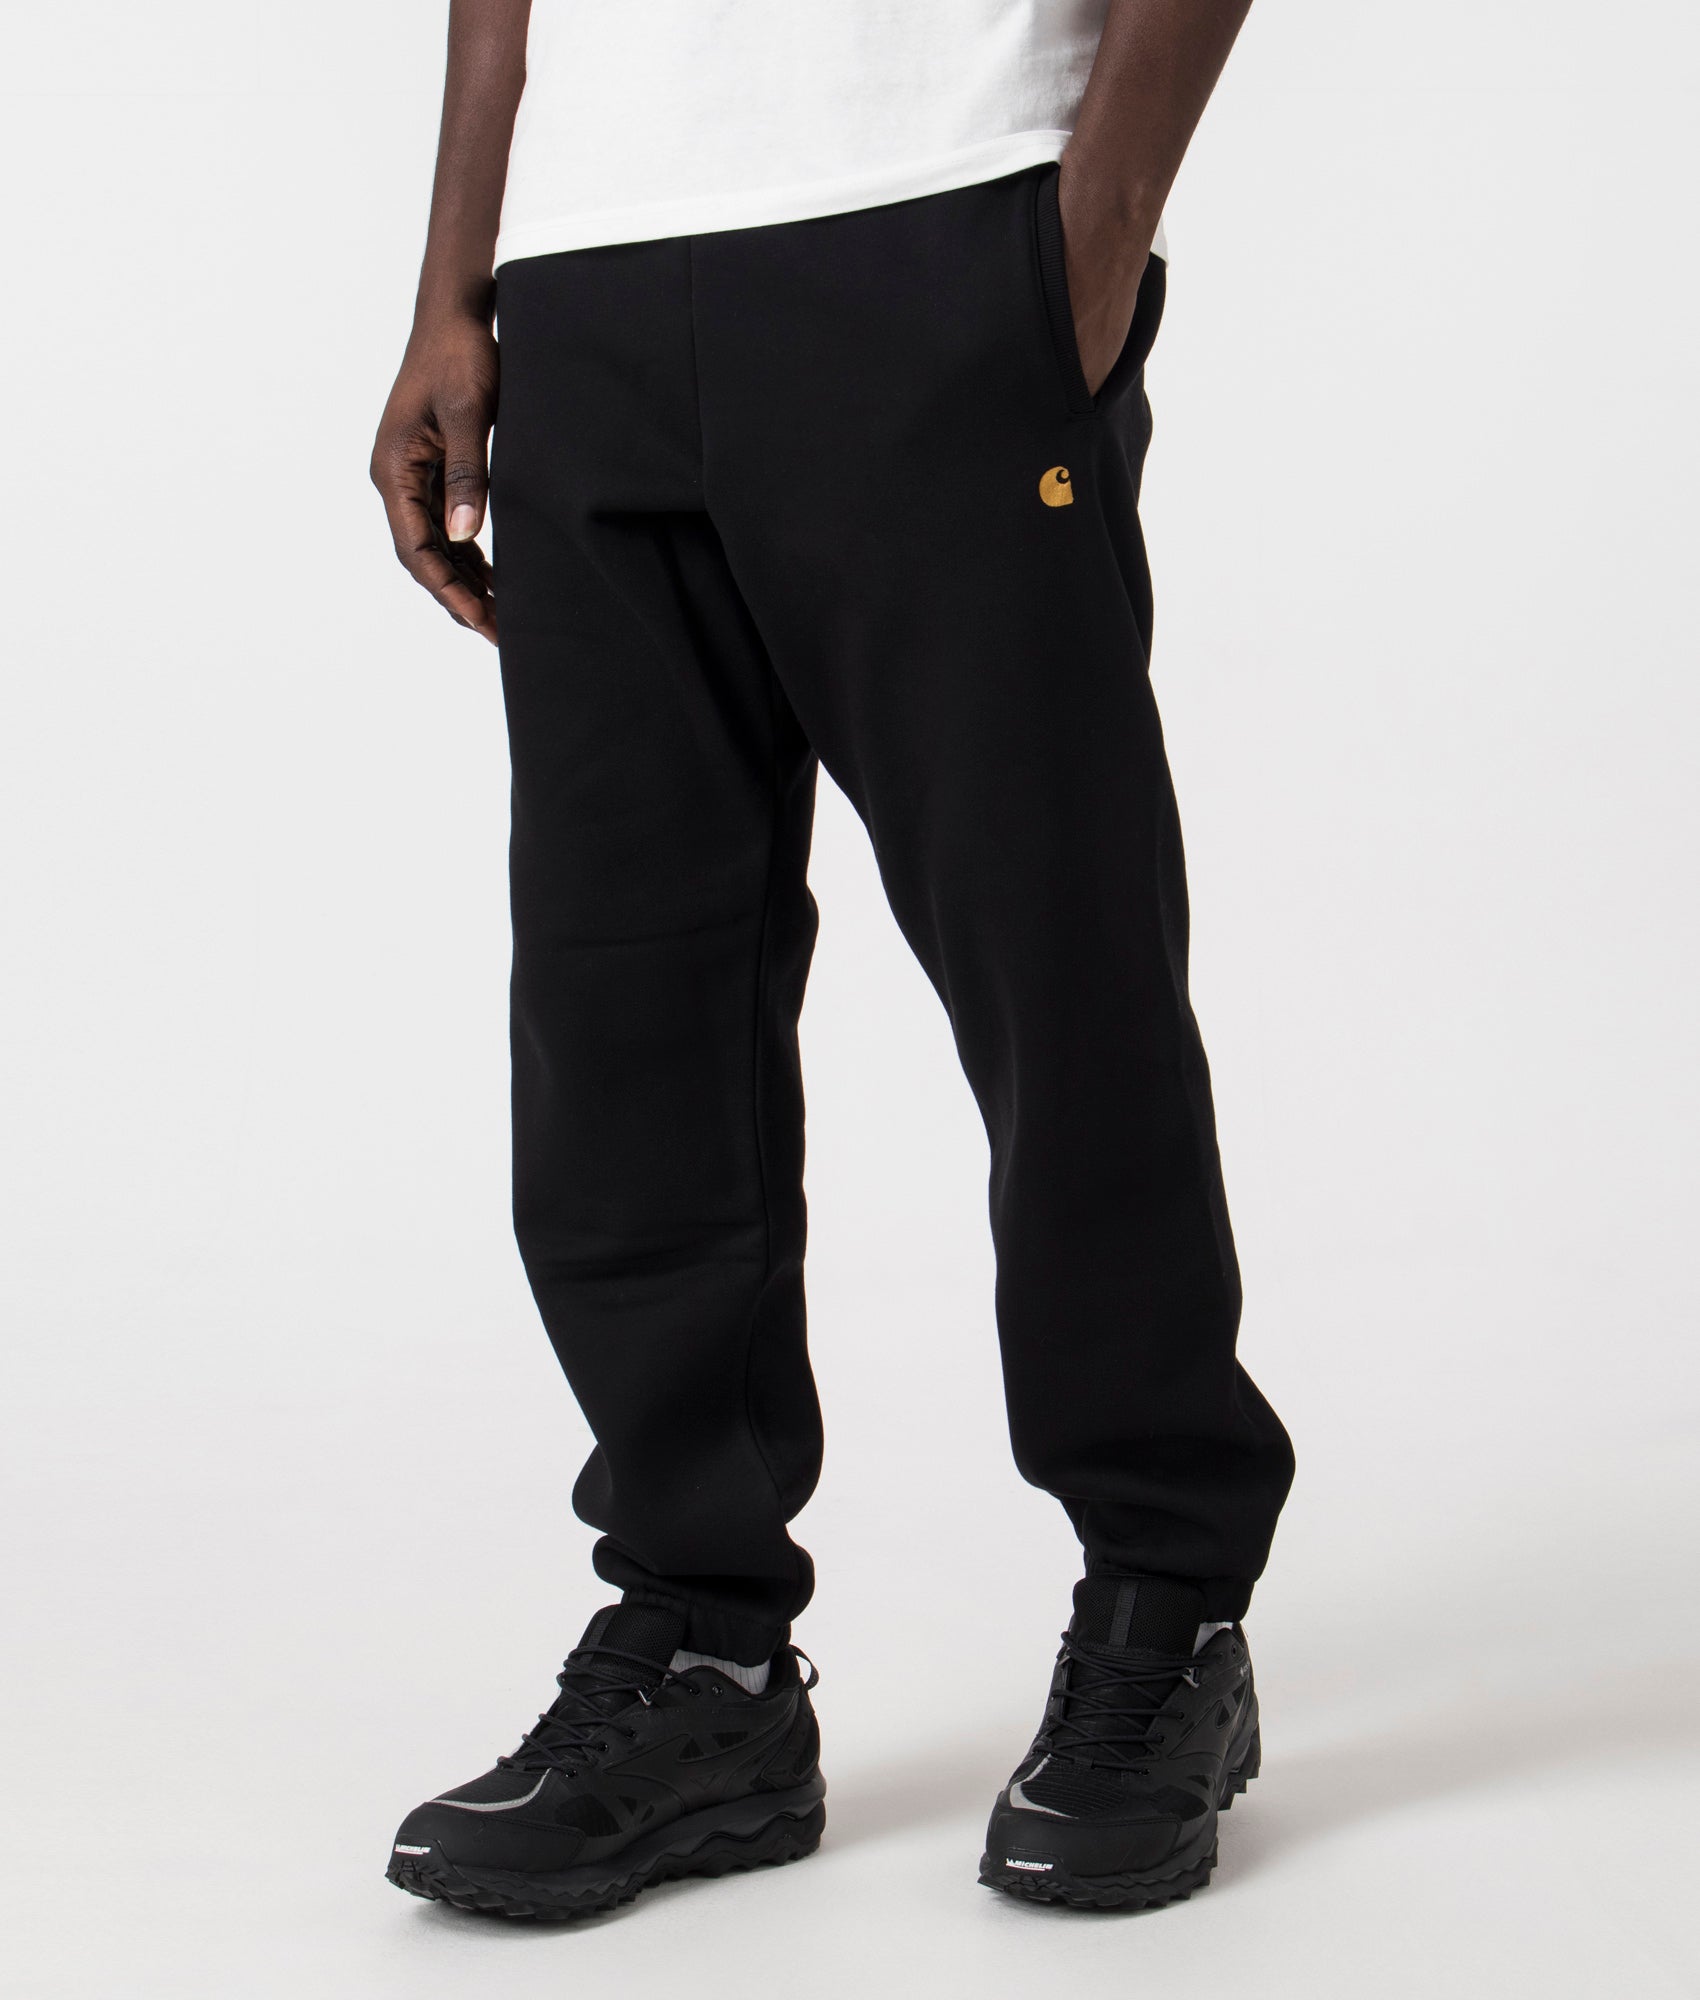 Carhartt WIP Mens Chase Joggers - Colour: 00FXX Black/Gold - Size: Large